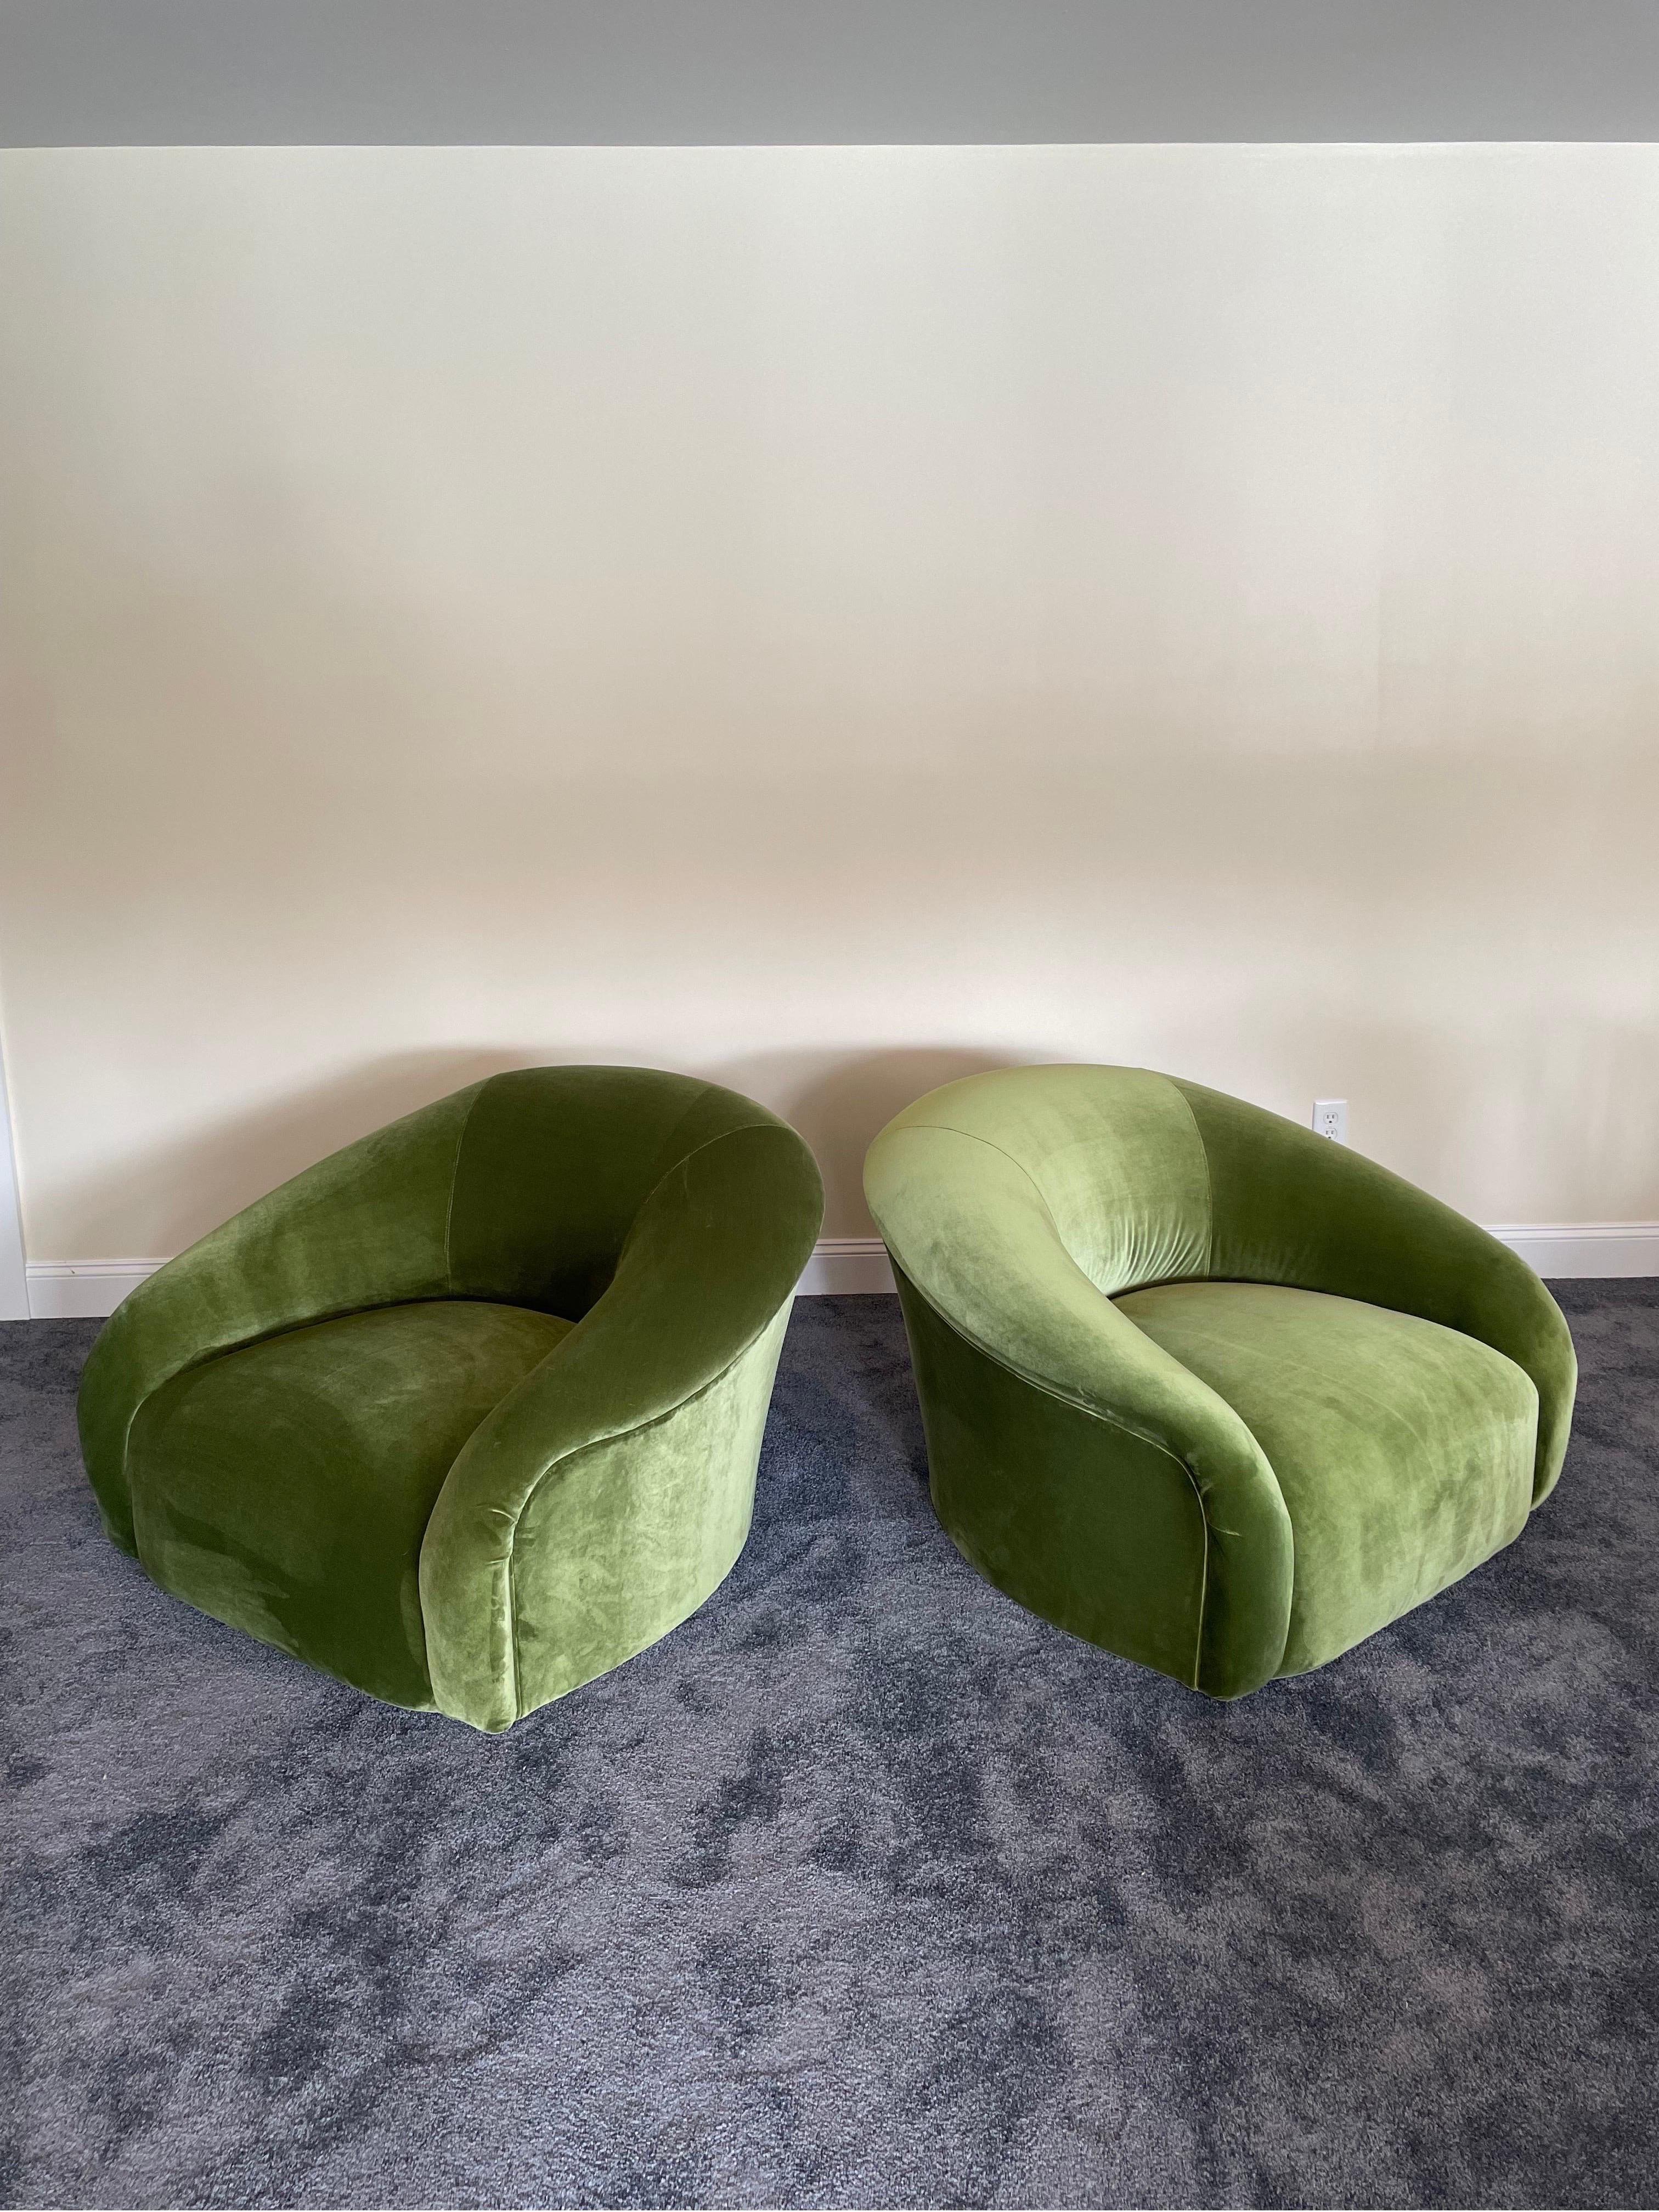 American Vintage Oversized Tub Chairs by Sally Sirkin Lewis for J Robert Scott- a Pair For Sale